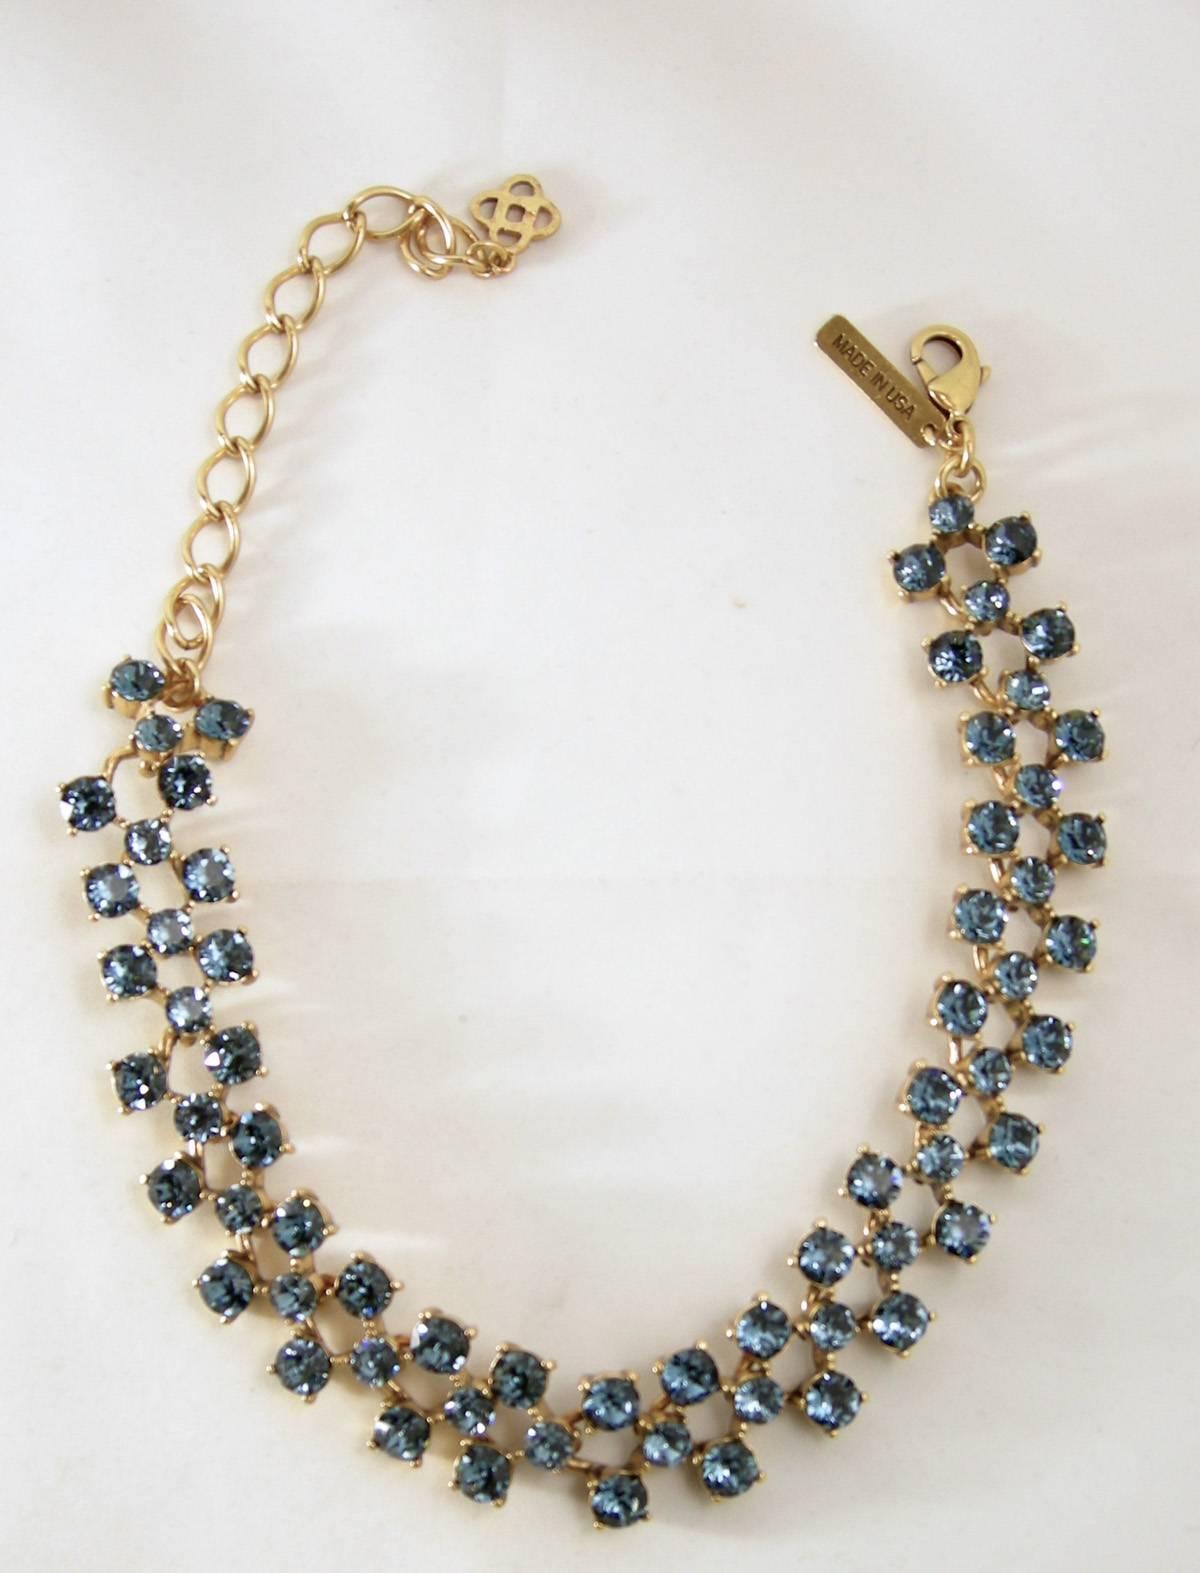 This is an outstanding set and is a classic showstopper. This Vintage Oscar De La Renta necklace features 3 rows of all blue sparkling rhinestones in a gold tone setting.  It measures 18” x 3/8” while the matching clip rhinestone drop earrings